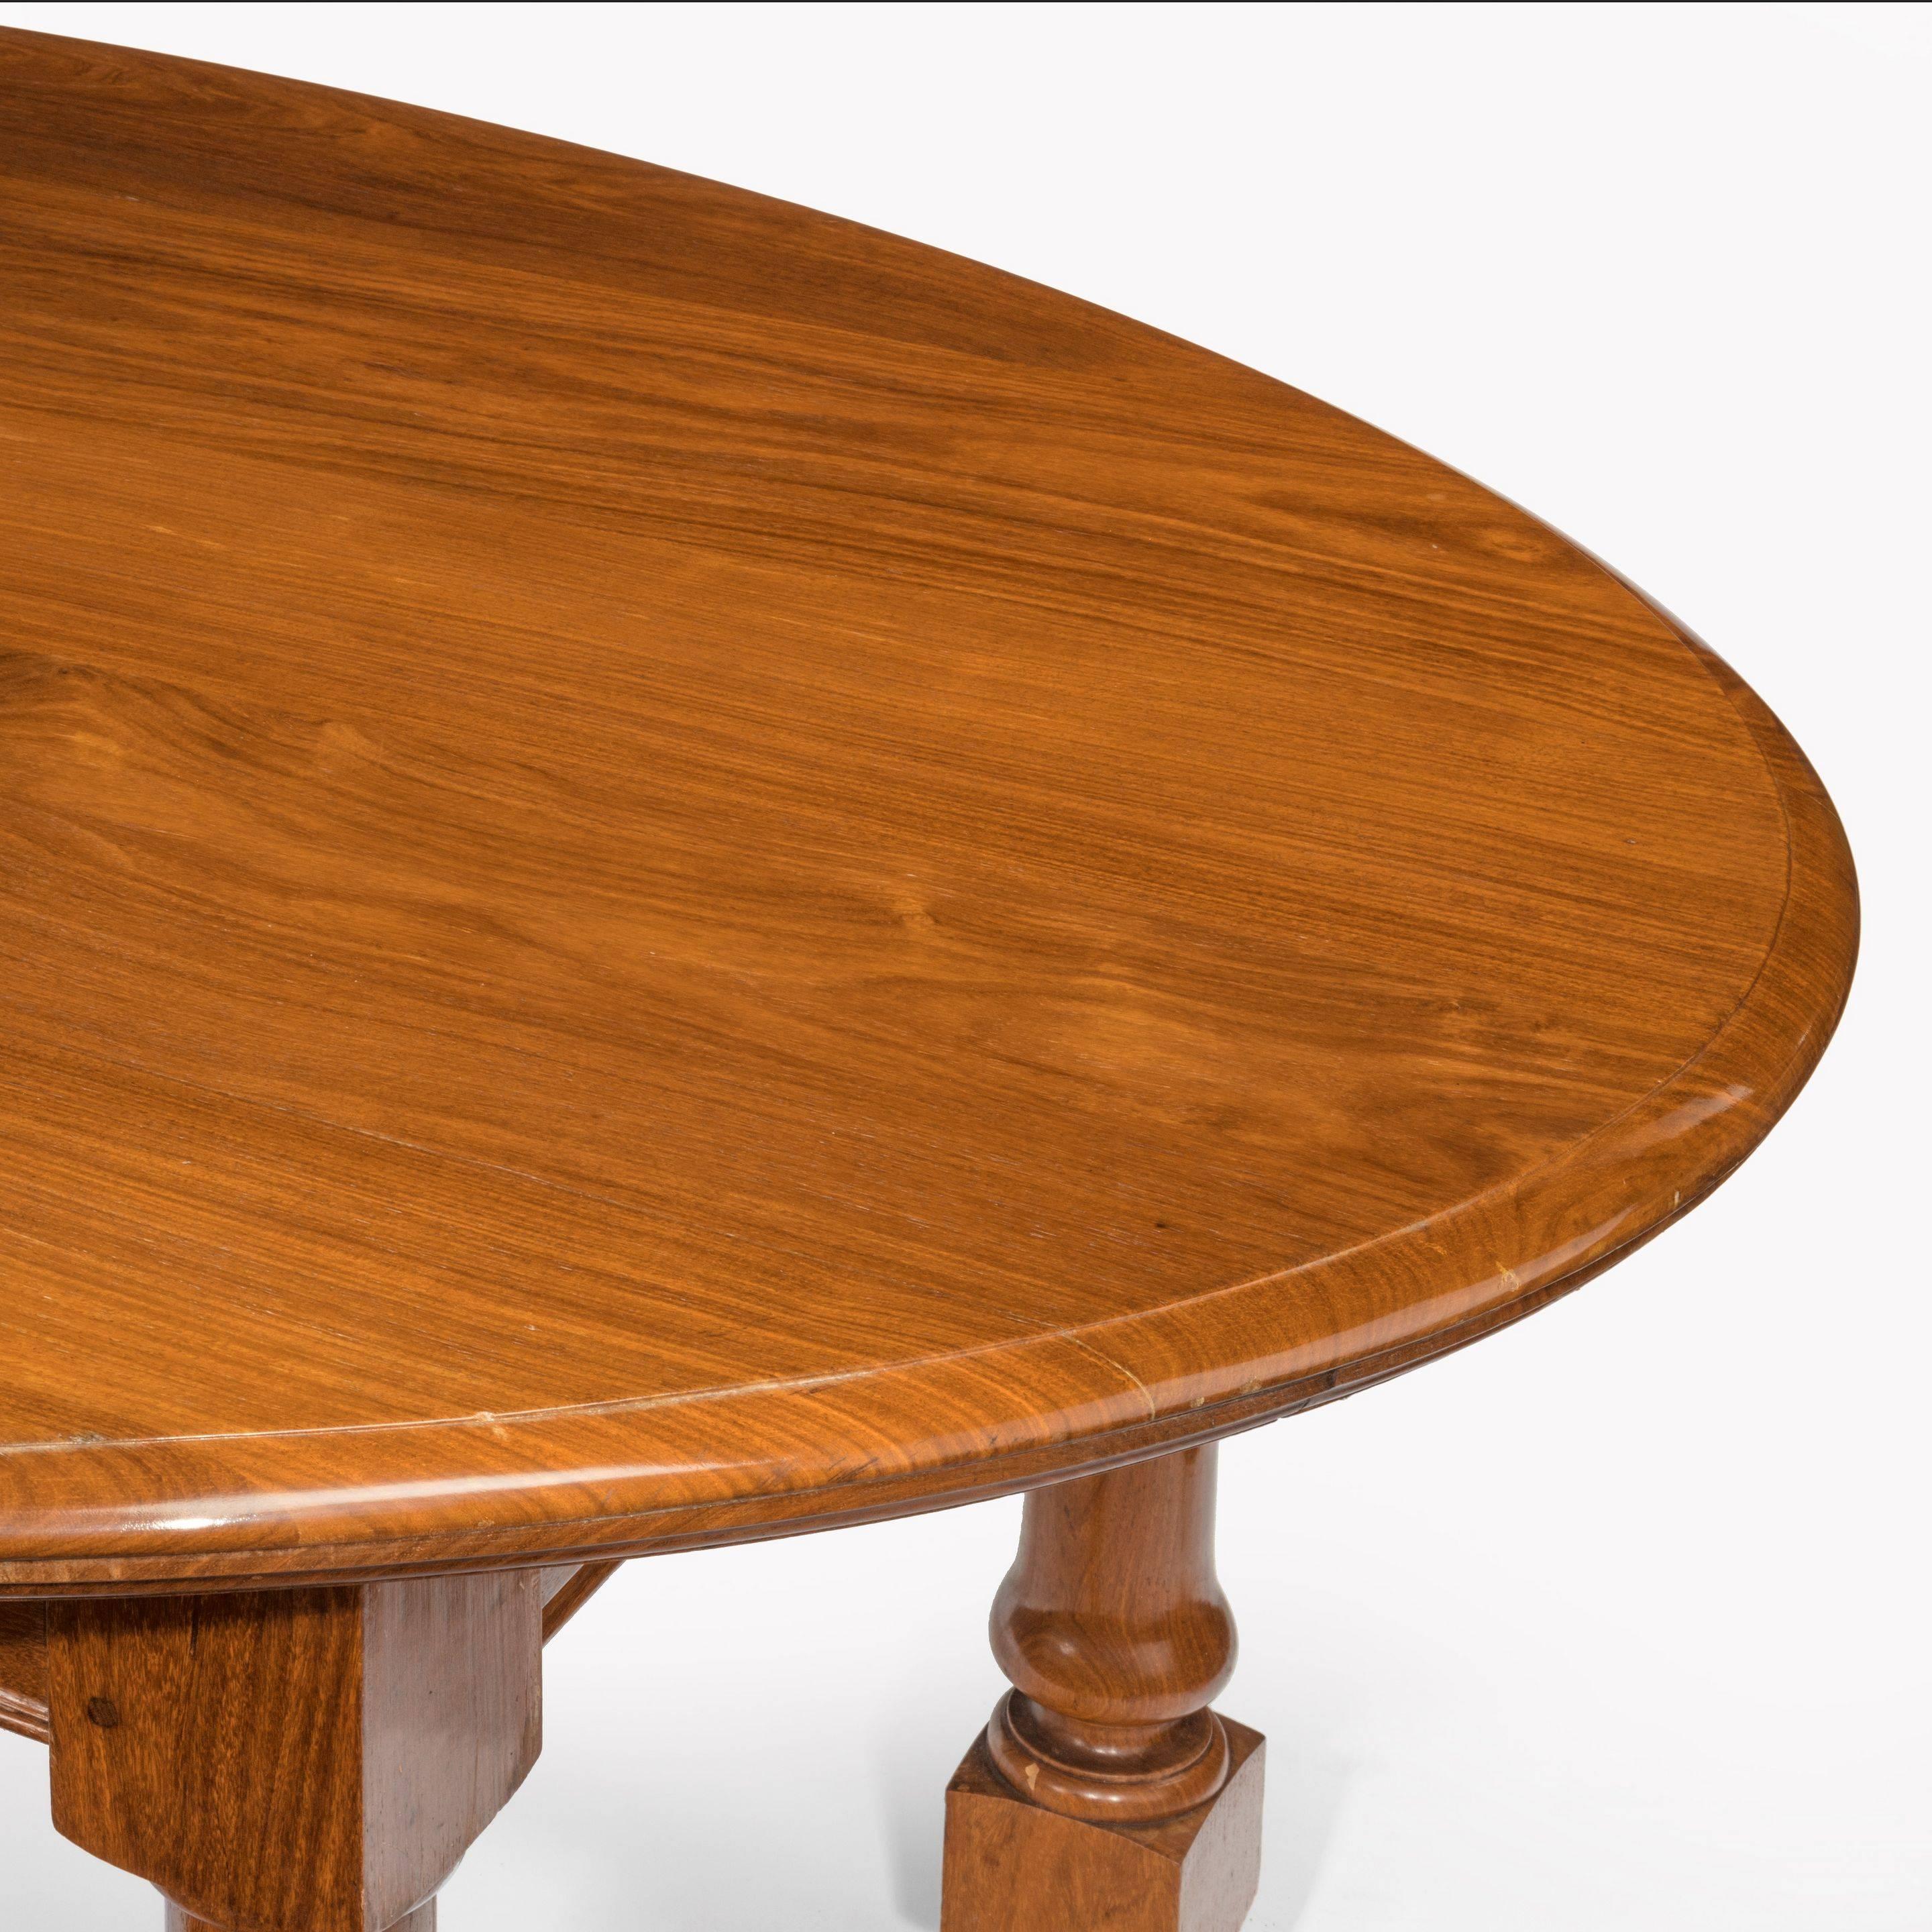 An extremely Rare oval 19th century colonial hardwood campaign table. The large oval top is detachable from the folding gun barrelled turned legs. Circa 1860 